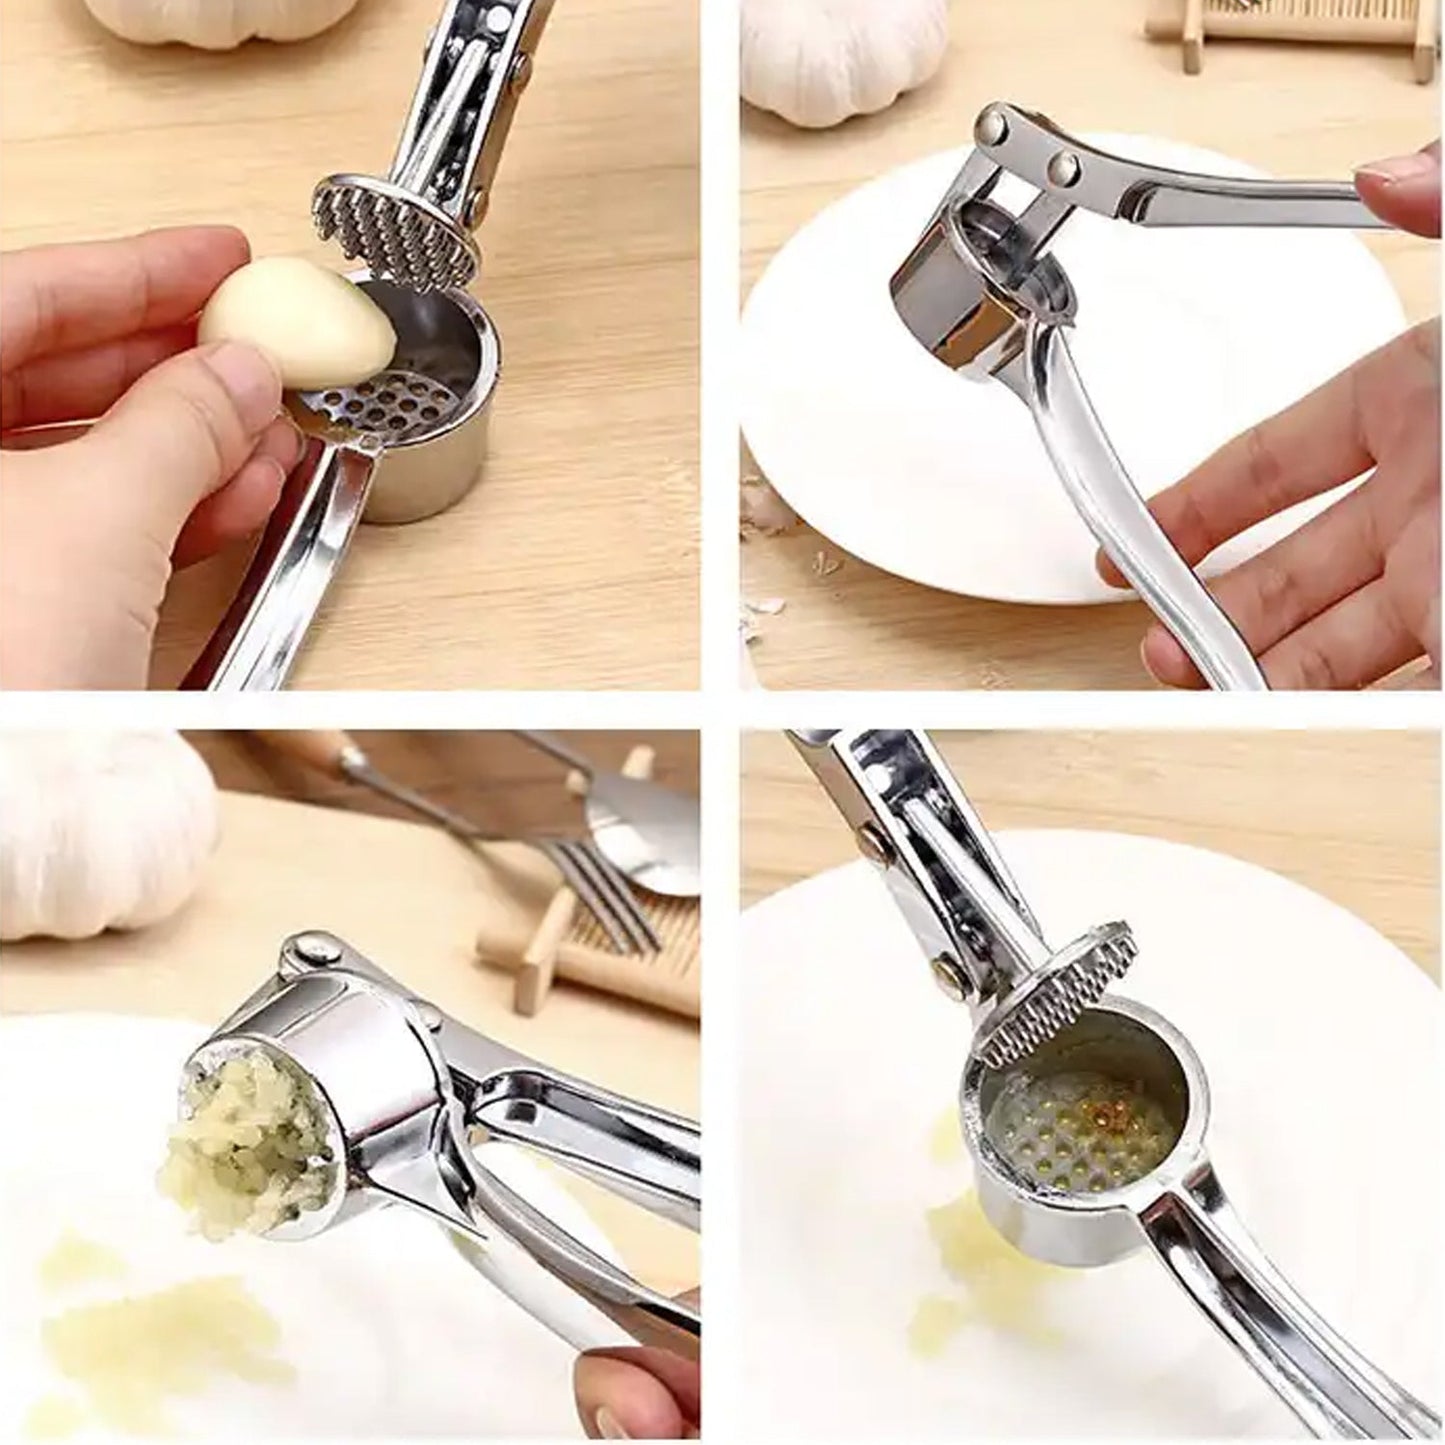 7025 GARLIC PRESS ALL ALUMINUM EASY TO USE WITH LIGHT WEIGHT WITHOUT DIFFICULTY COOKING BAKING, KITCHEN TOOL, DISHWAHER SAFE (1 Pc)